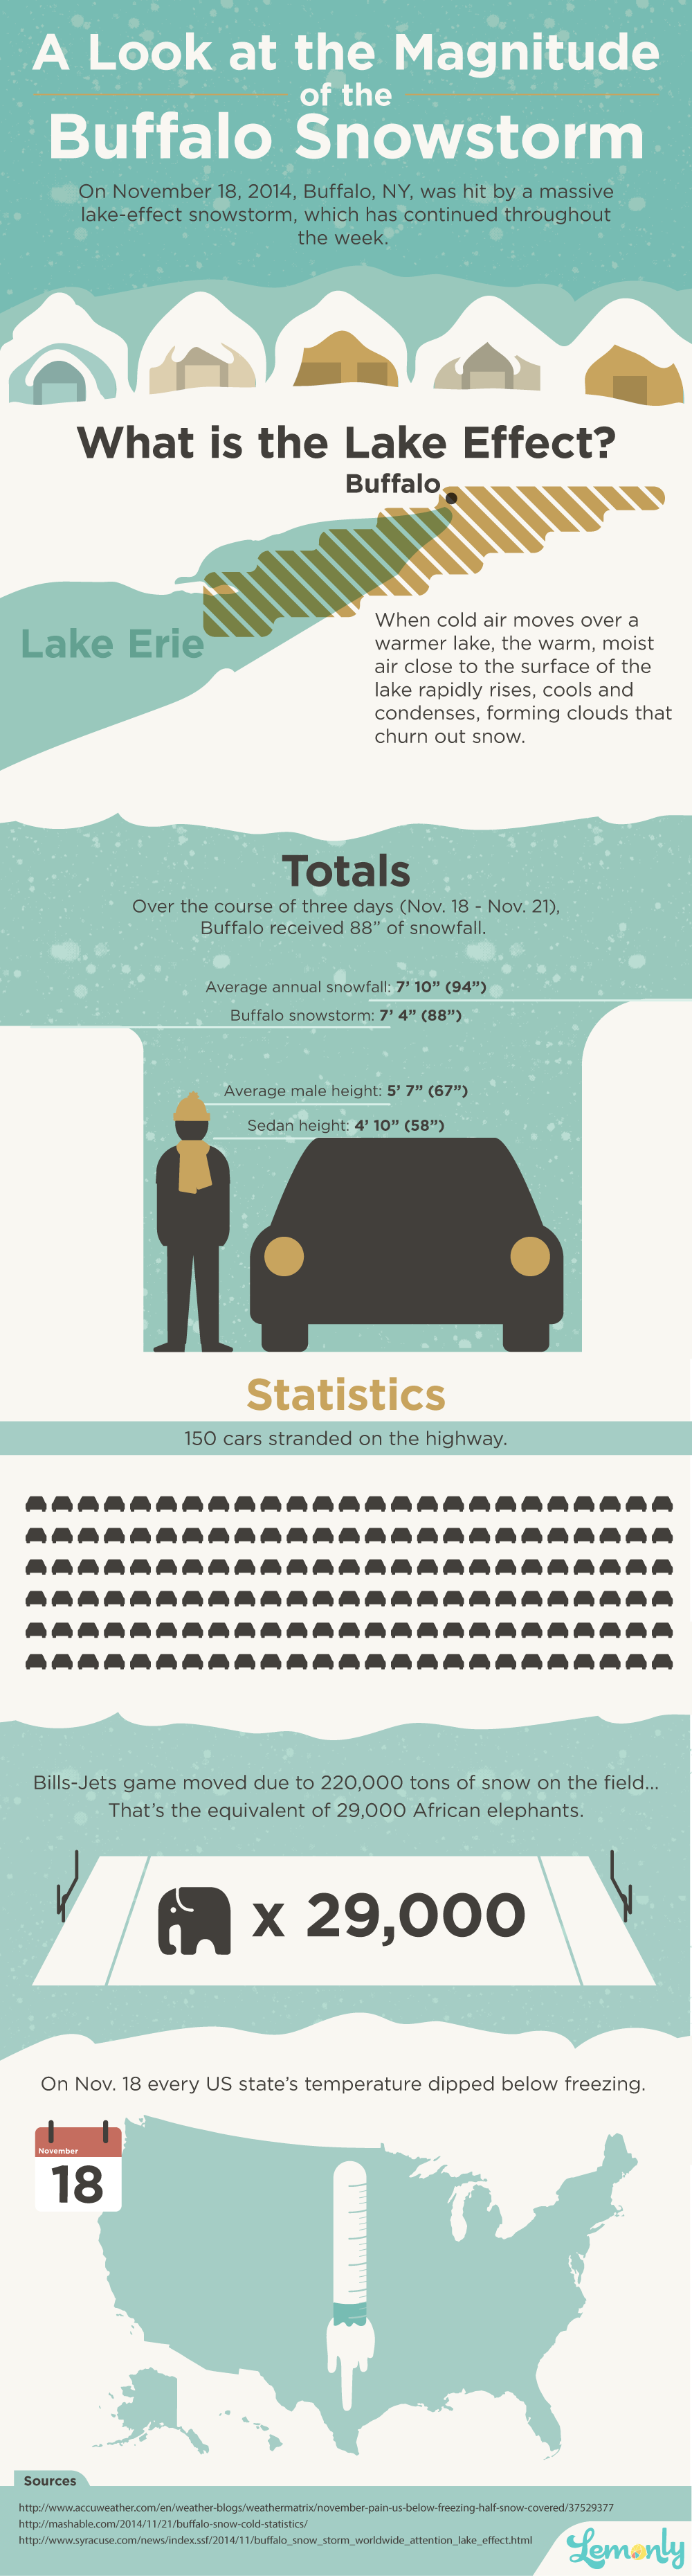 A Look at the Buffalo Snowstorm 2014 Infographic